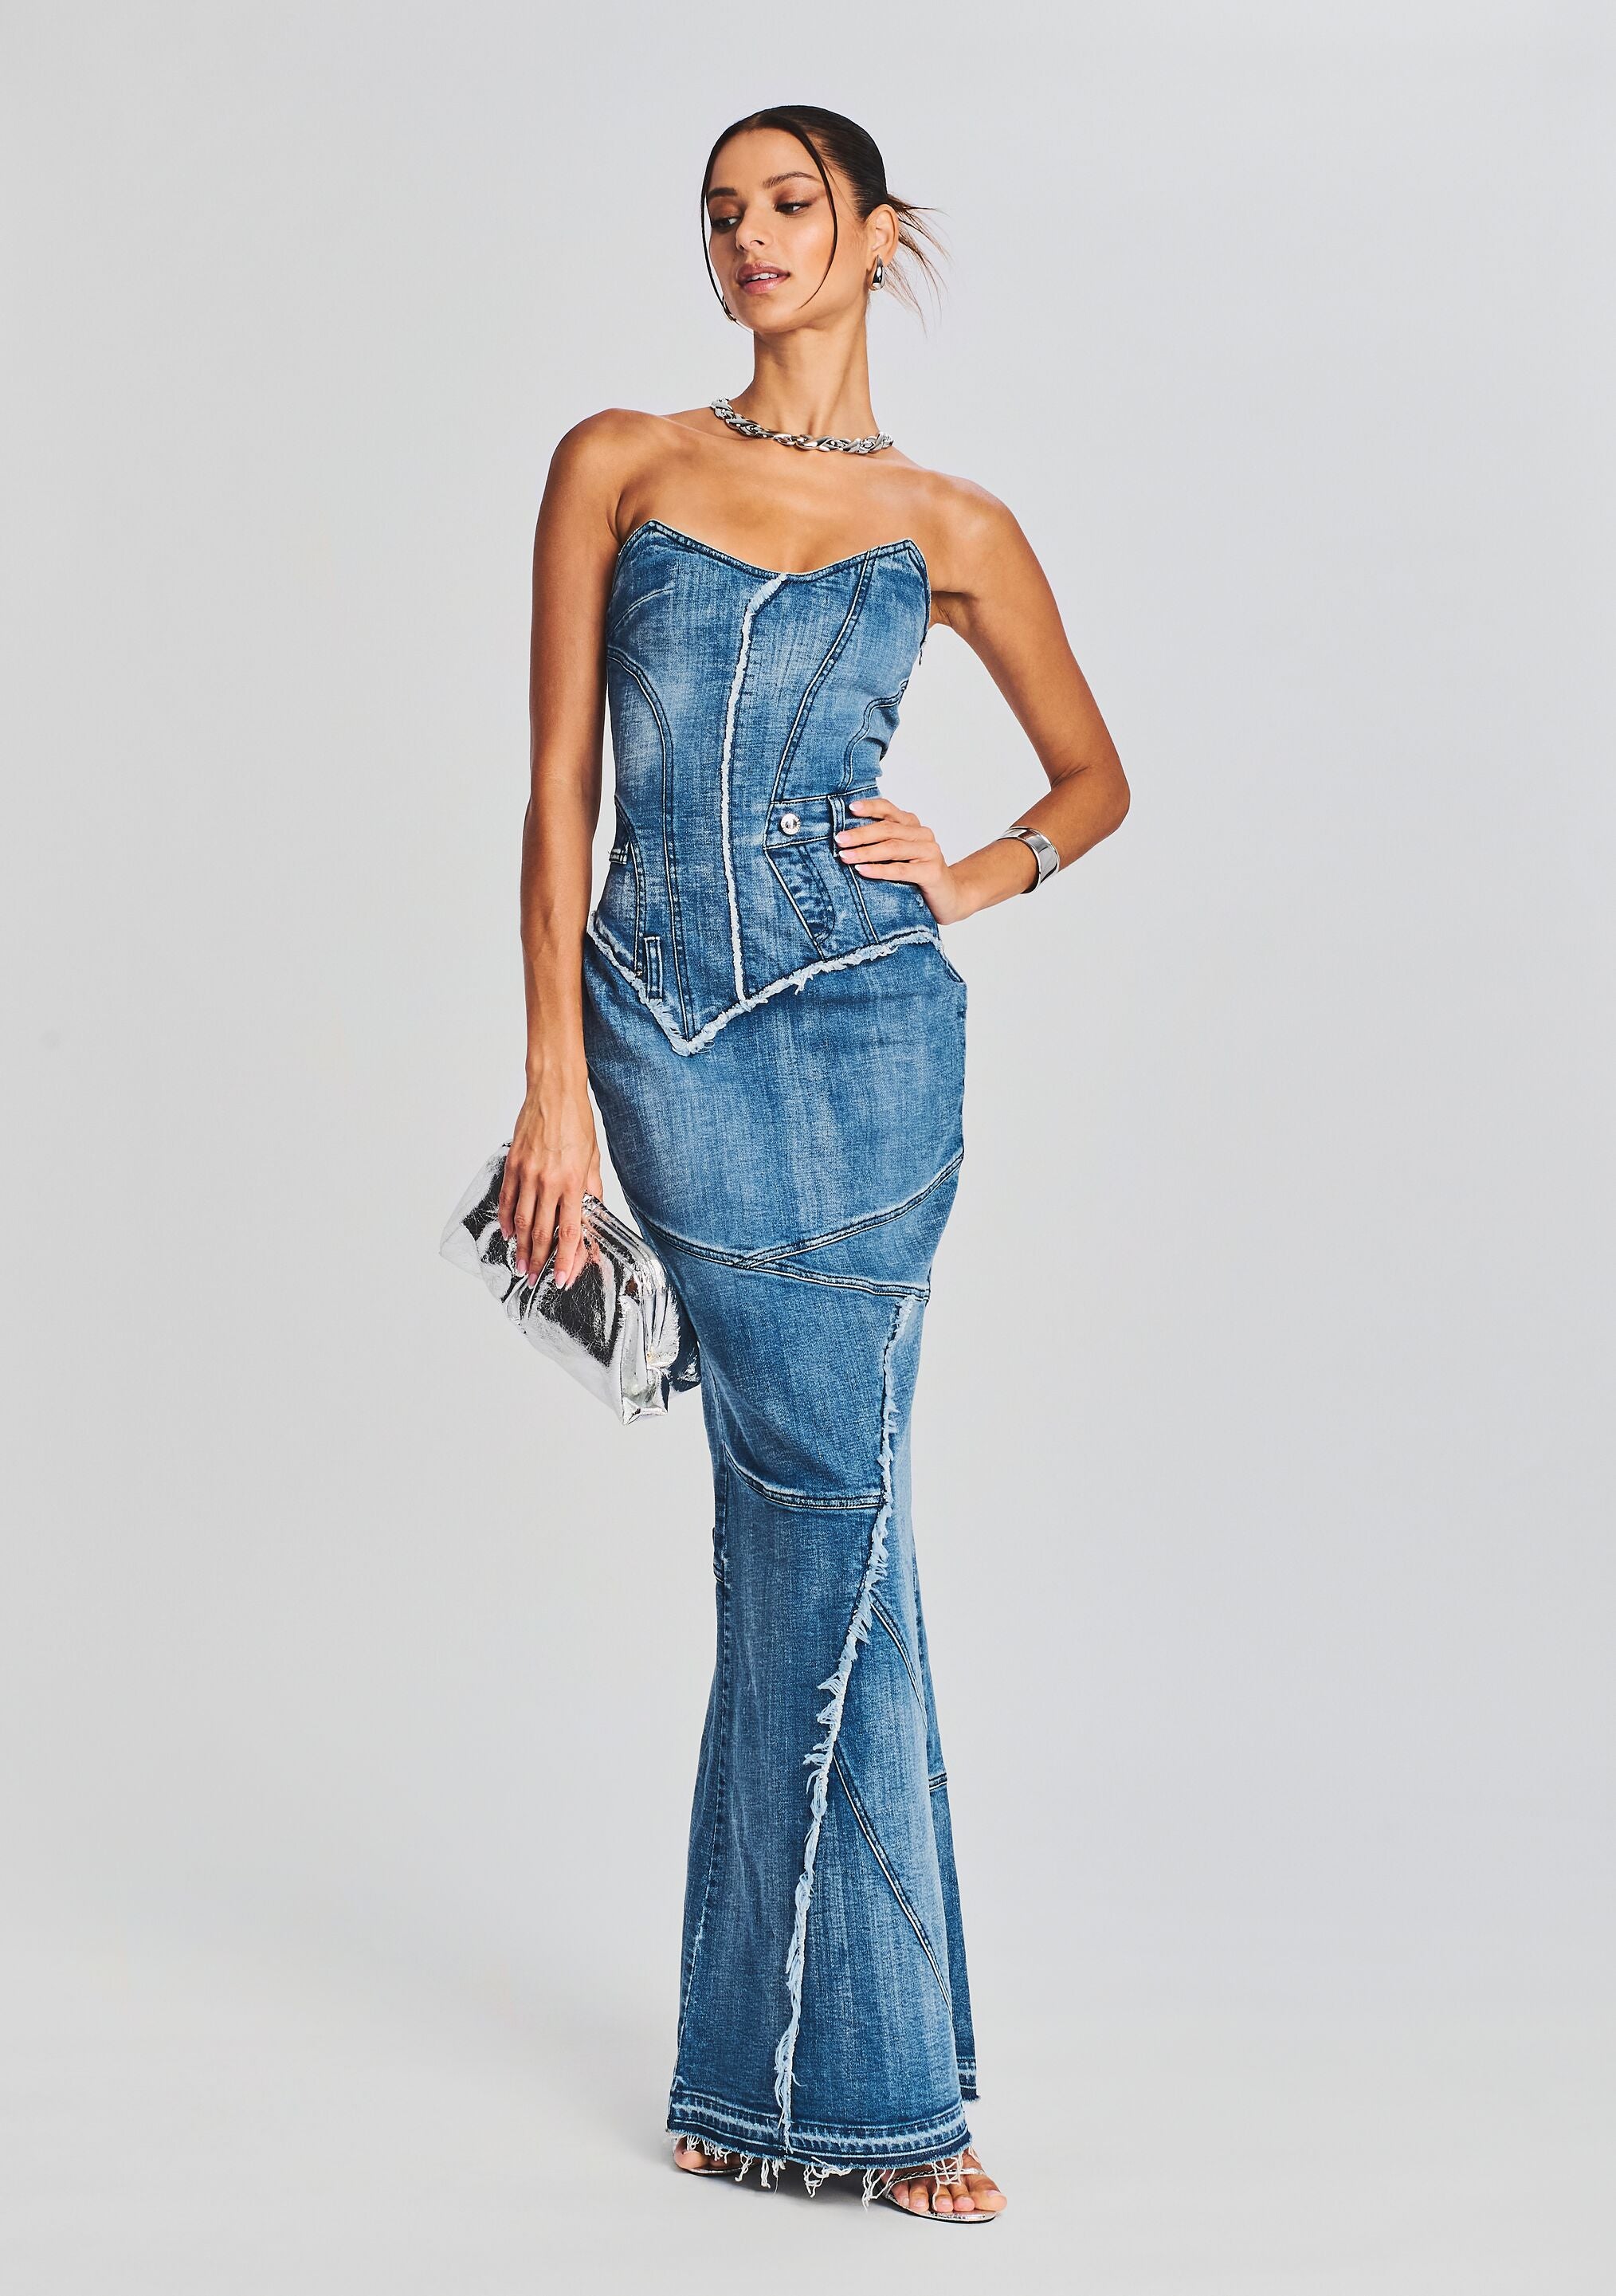 4 must-have denim trends for autumn, from wide-leg jeans to split skirts |  The Independent